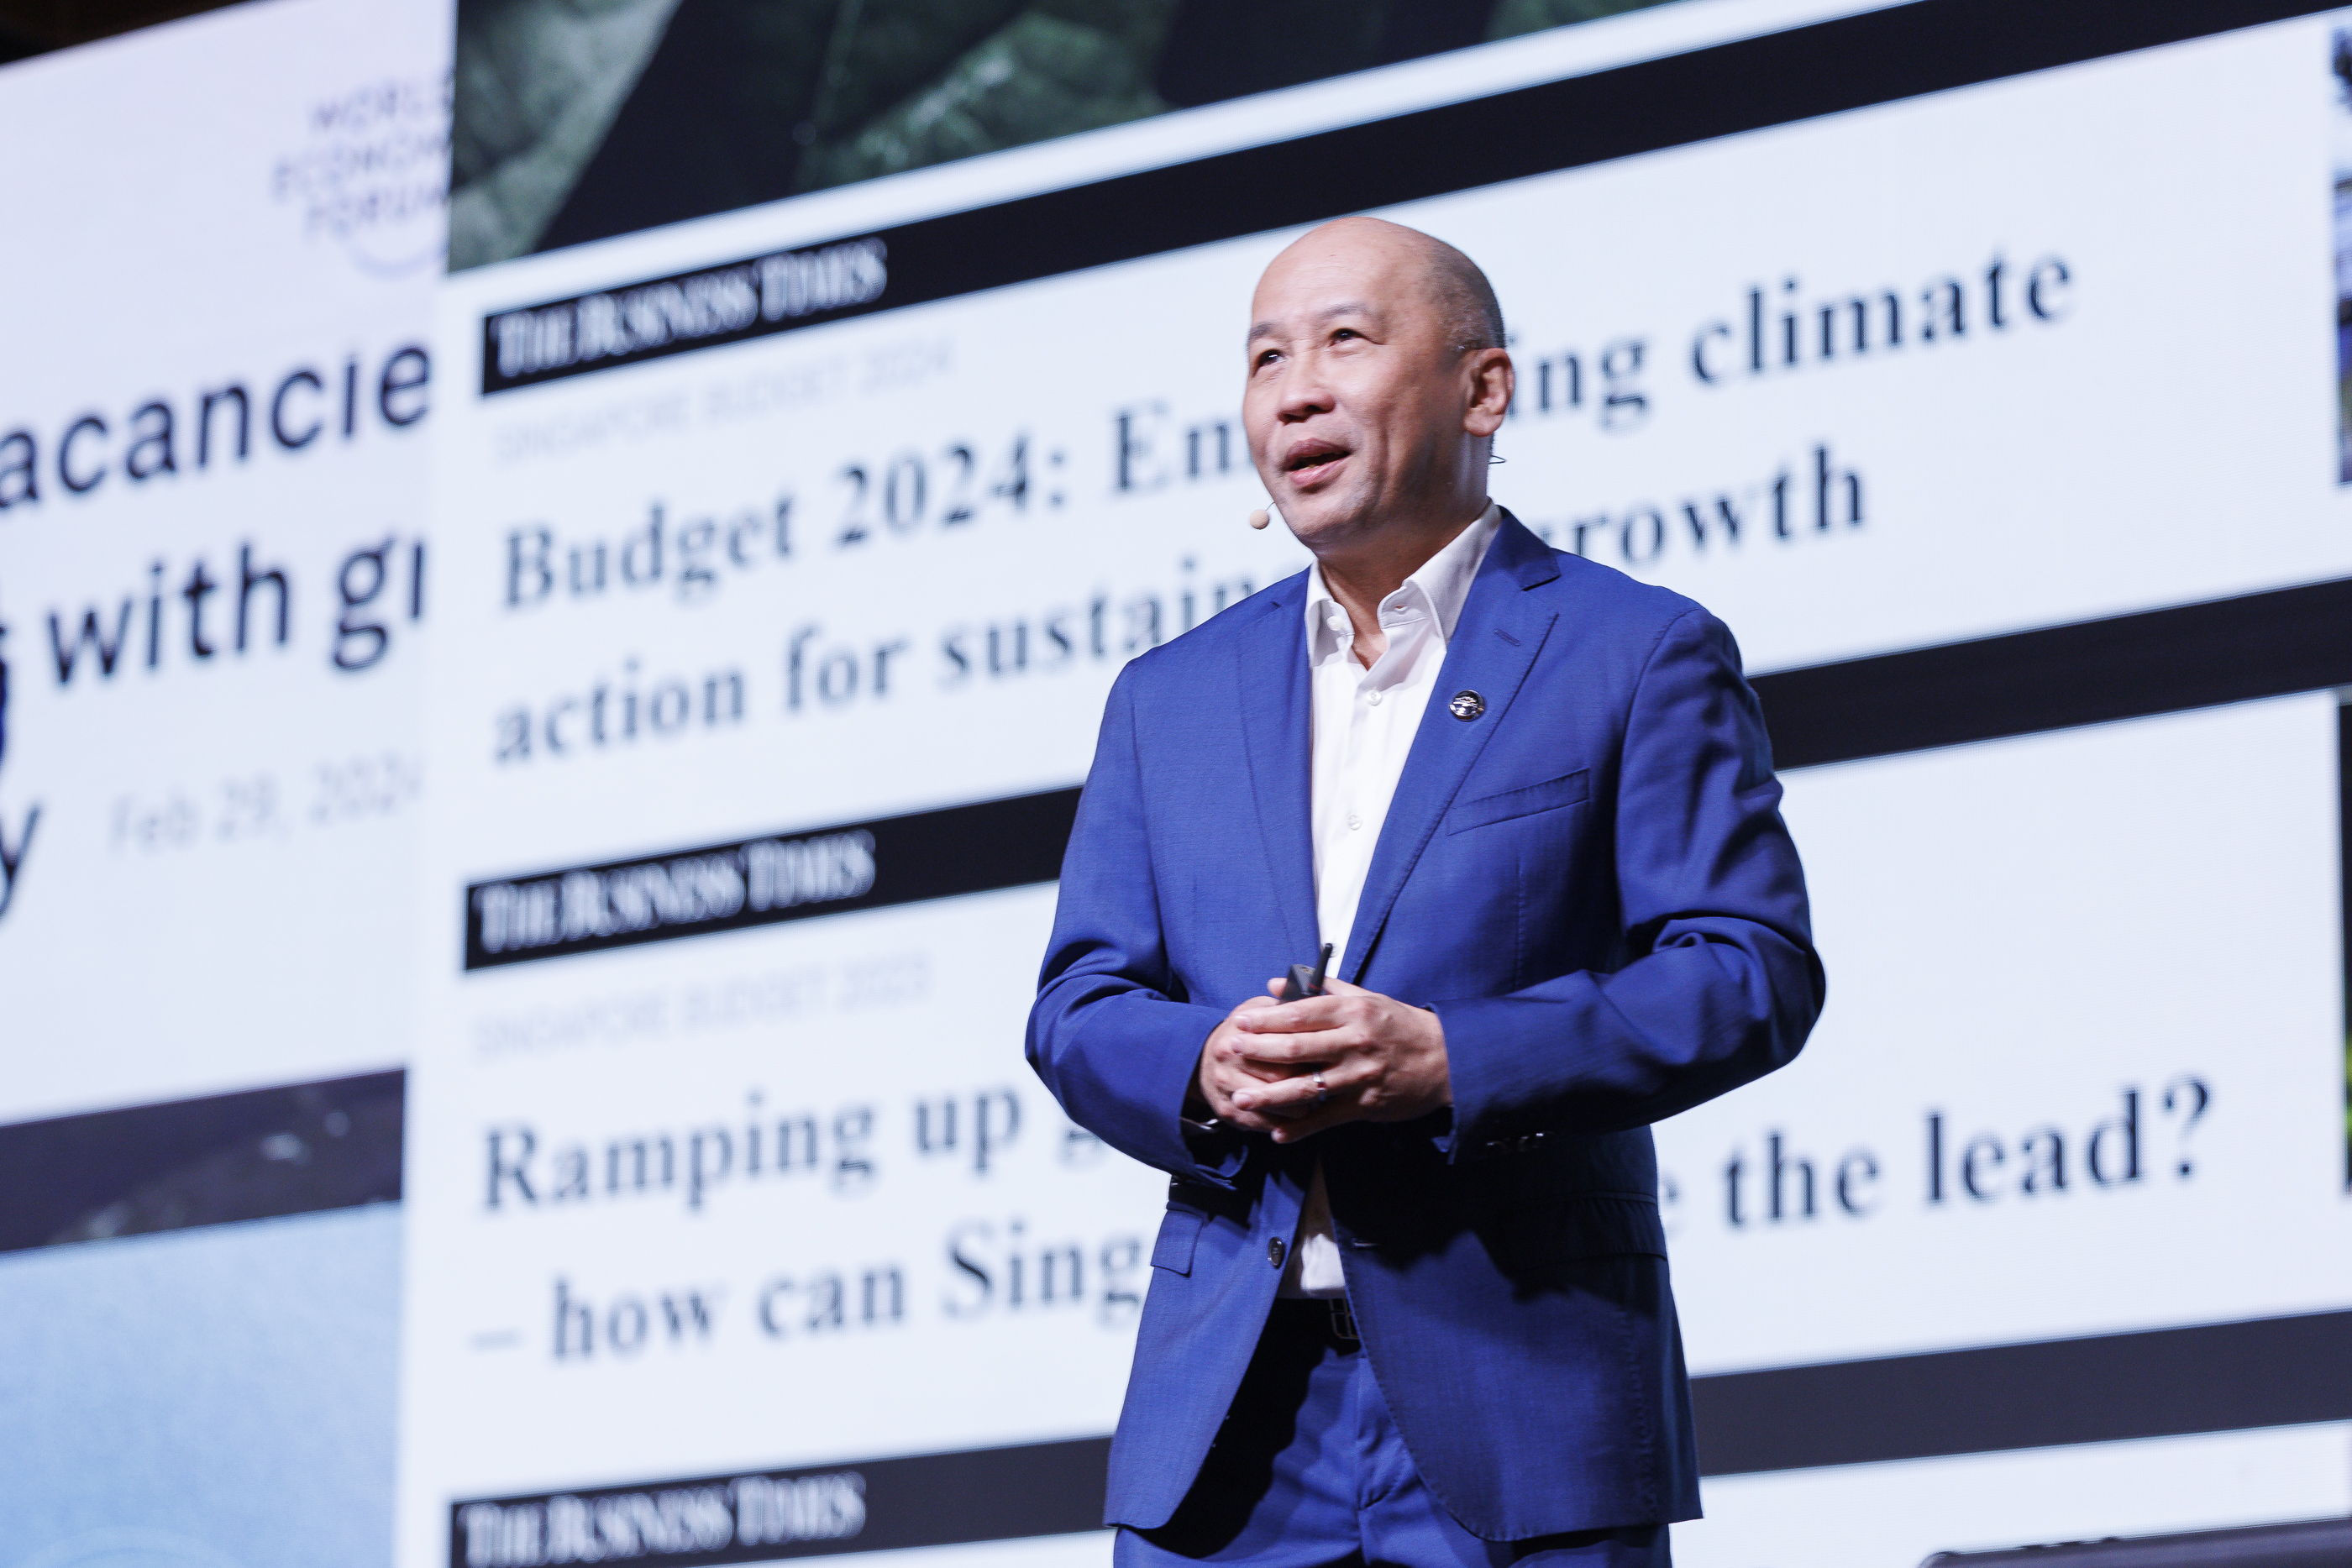 Singtel details environmental strategy and programmes at first sustainability forum